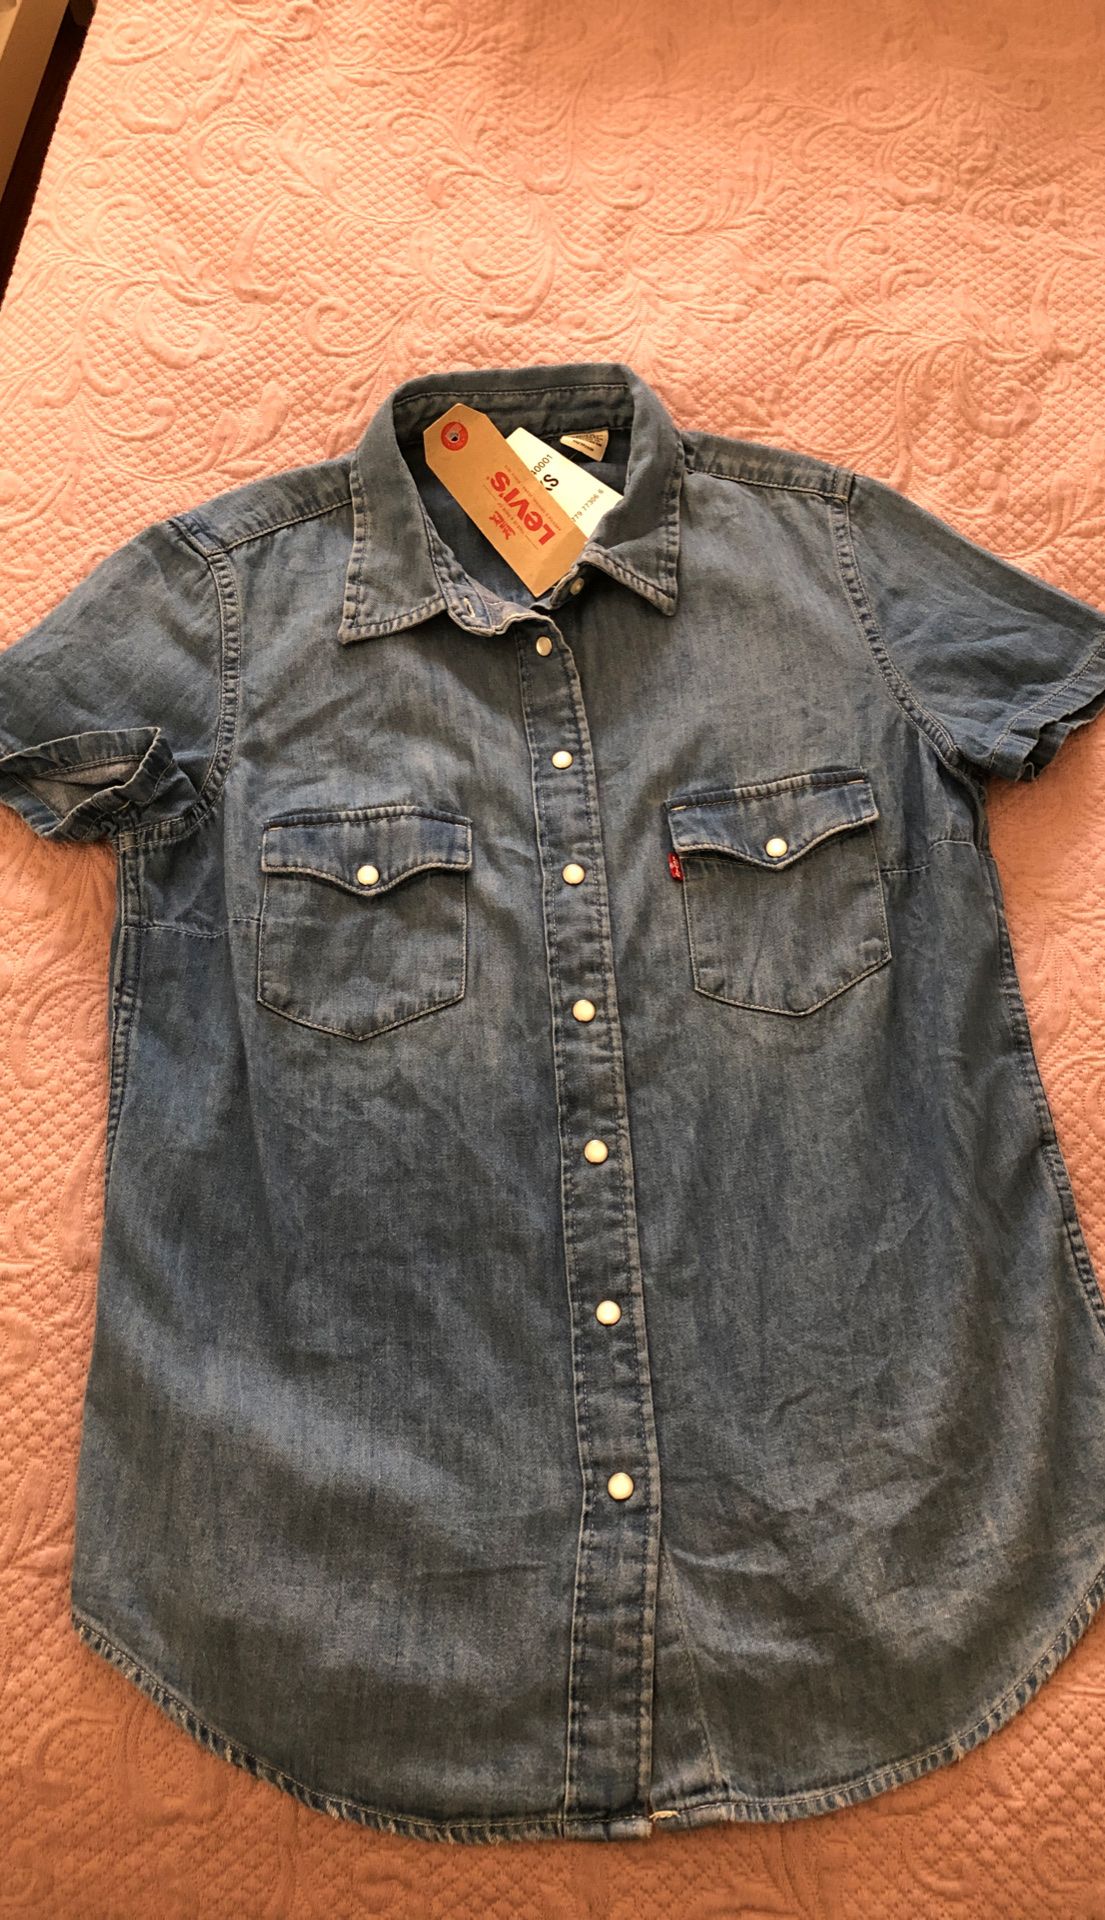 Levi’s XS women’s jeans shirt, new, tags on